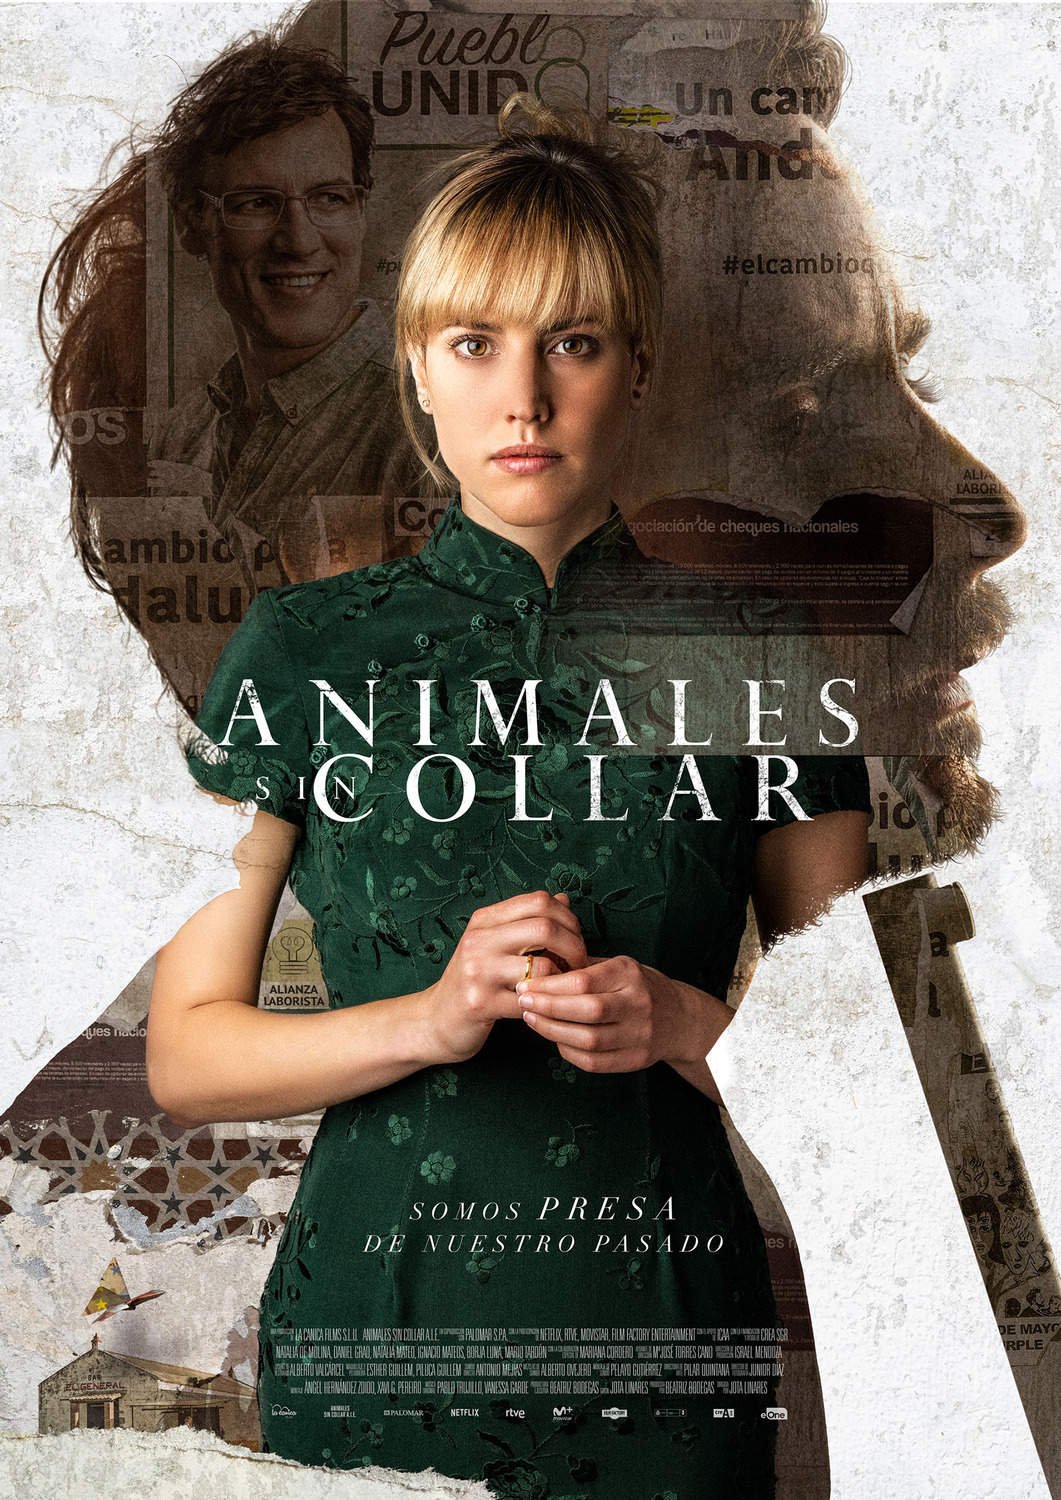 Extra Large Movie Poster Image for Animales sin collar 